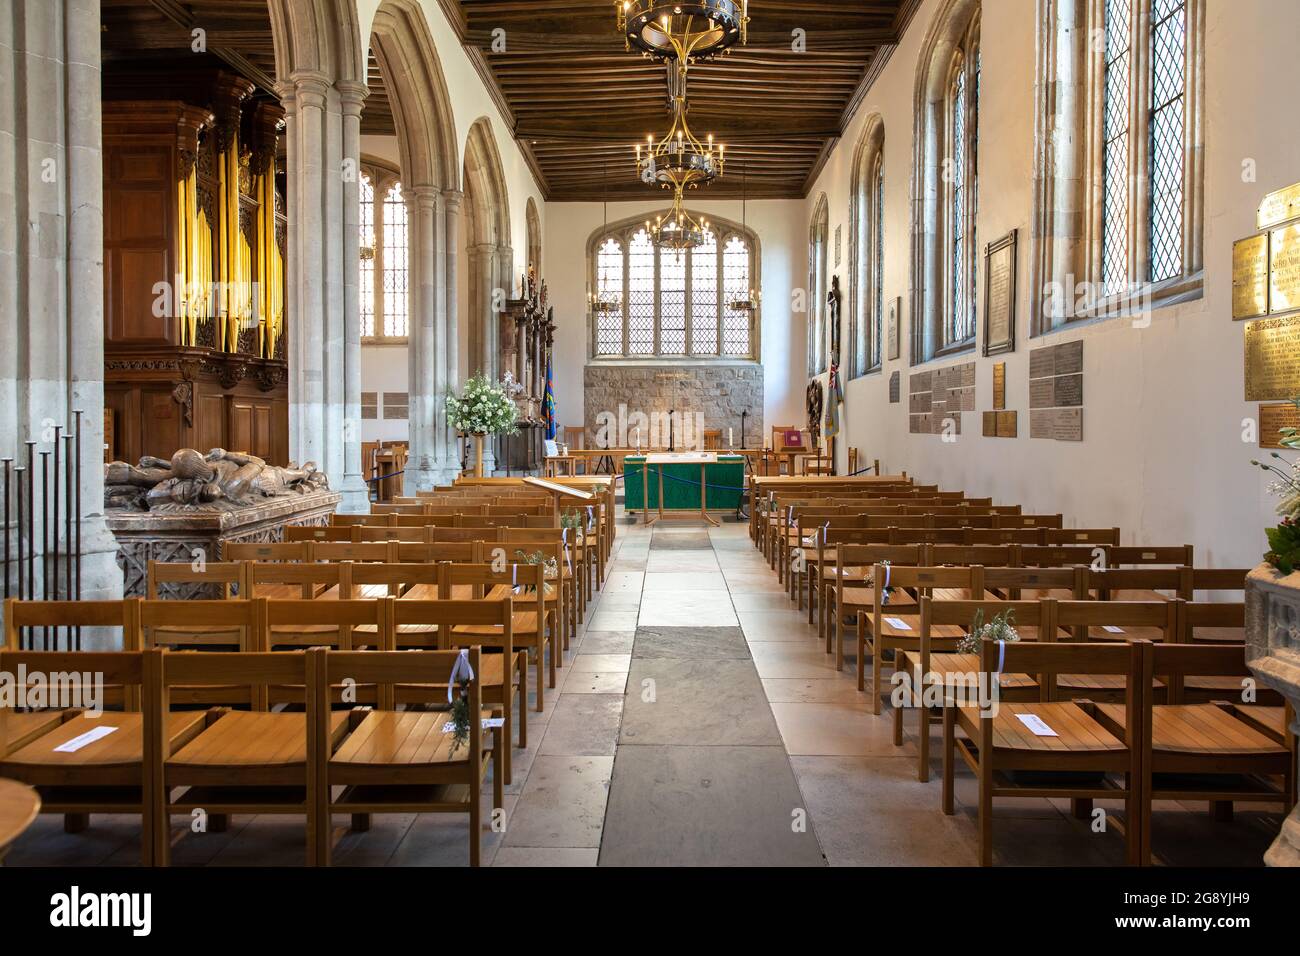 The Chapel Royal of St Peter ad Vincula, The Tower of London, Uk Stock Photo